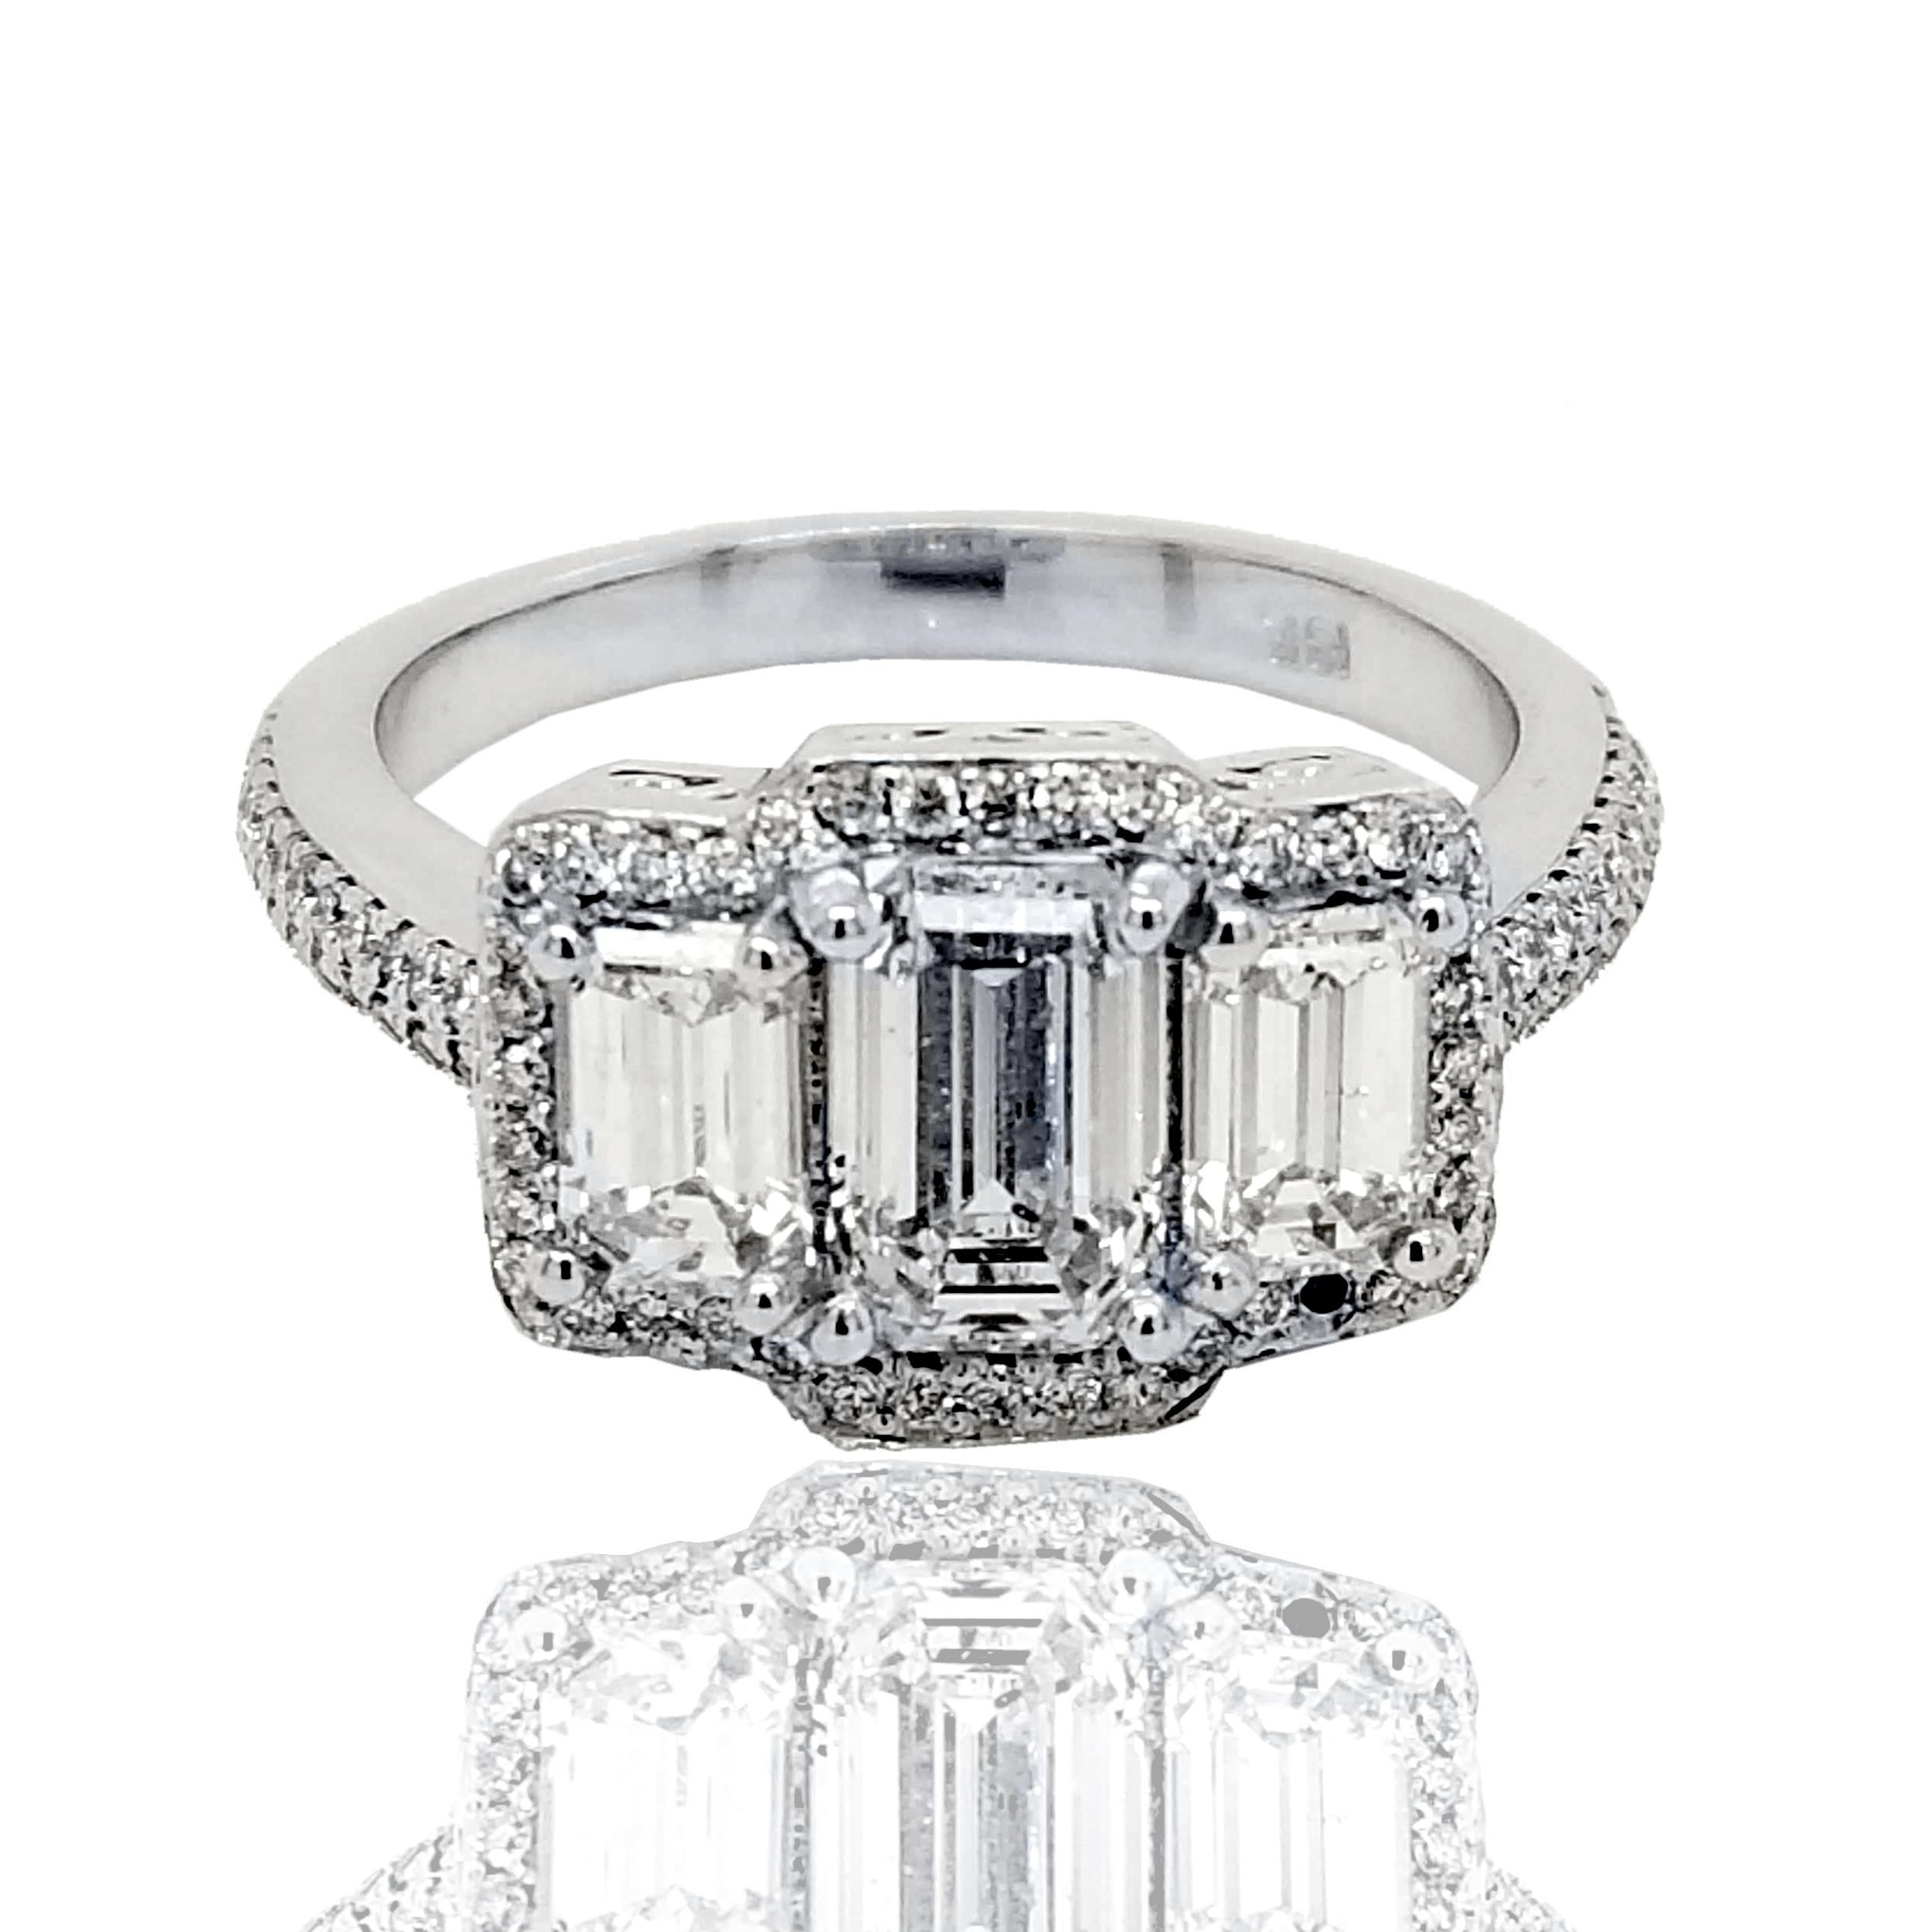 A beautiful 1.04 Ct Emerald Cut F-G/SI2 center Diamond set in a fine 18K Gold 3 stone Engagement Ring with 2 Emerald Cut  diamonds the side with Pave Set Halo and Shank. Total diamond weight of 1.08 Ct. on the side. 

Diamond specs:
Center stone: